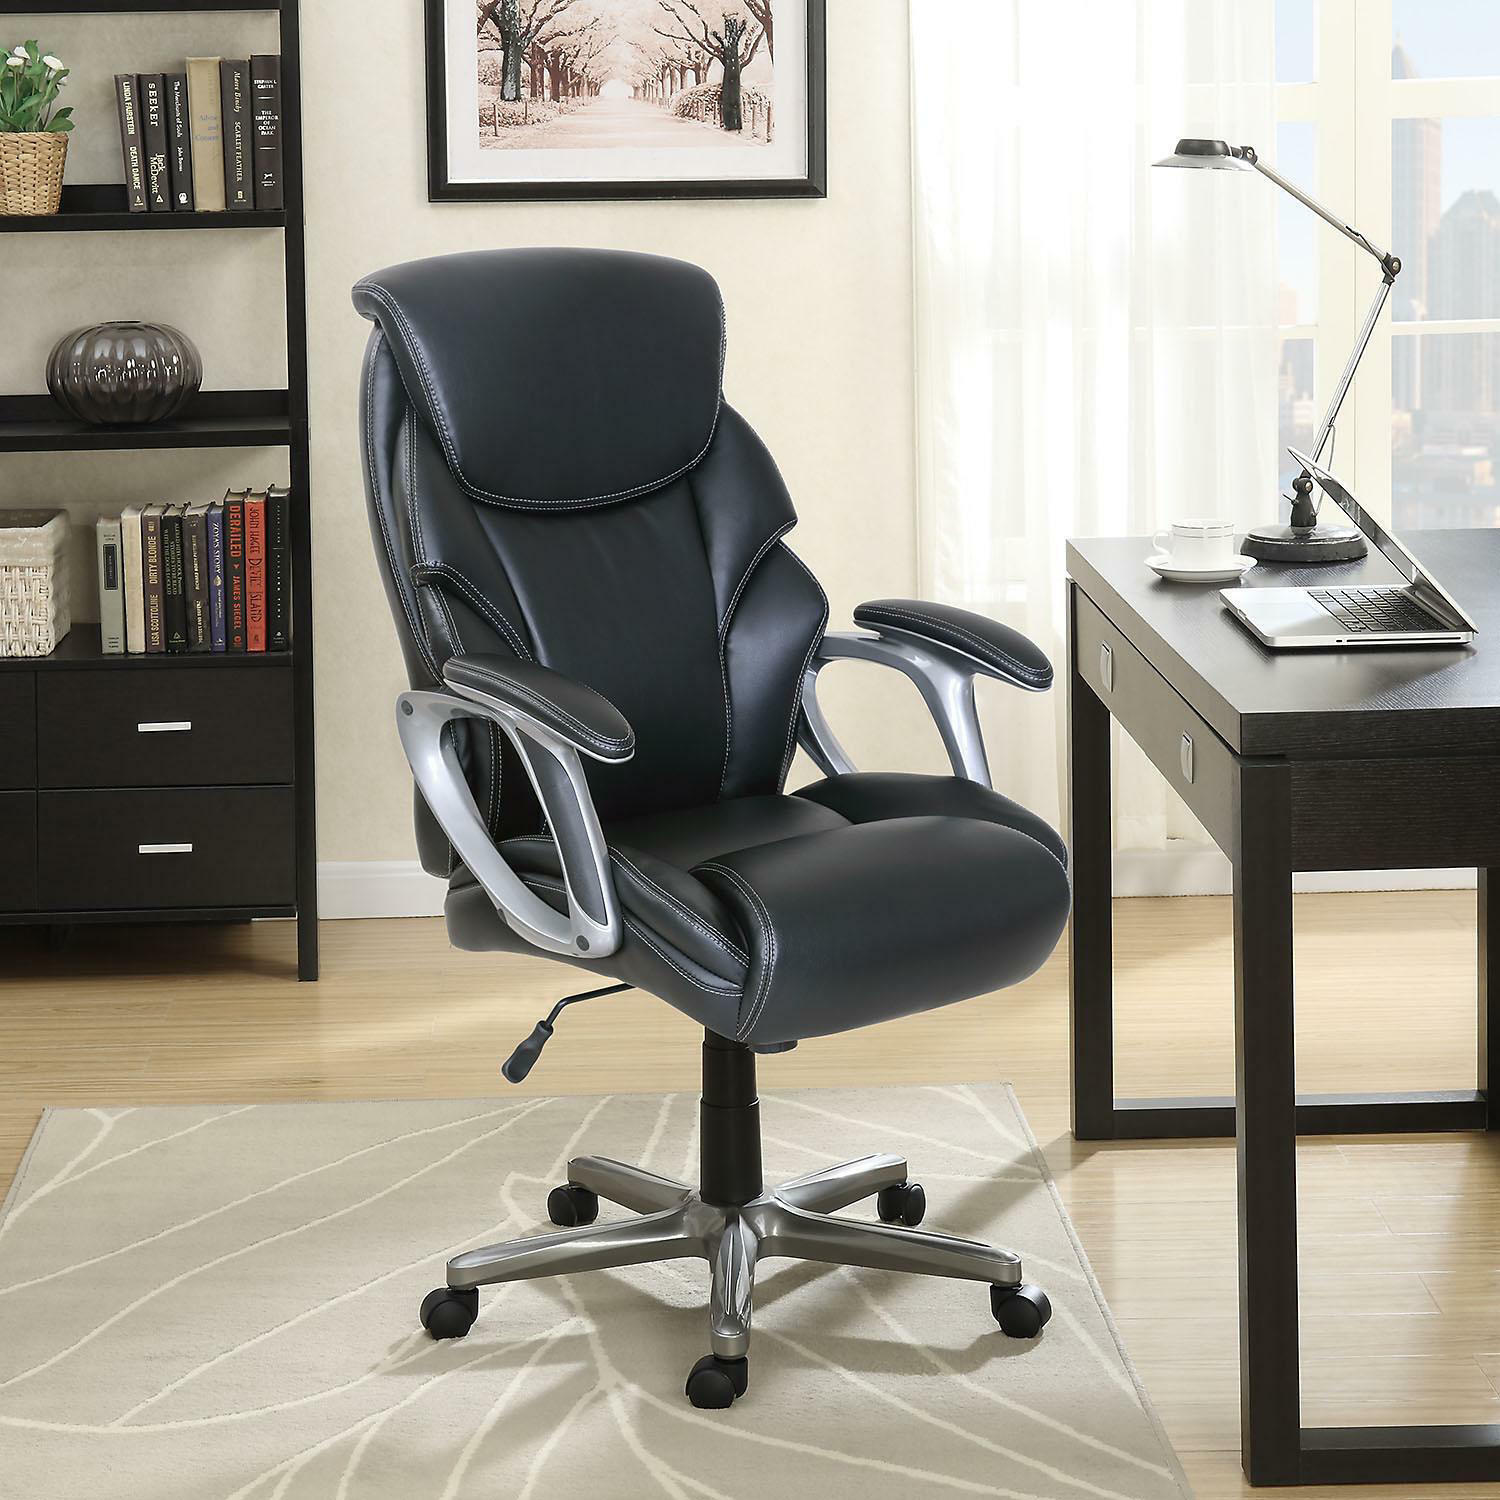 Brand NEW Serta Manager's Office Chair, Supports up to 250 lbs with Memory Foam